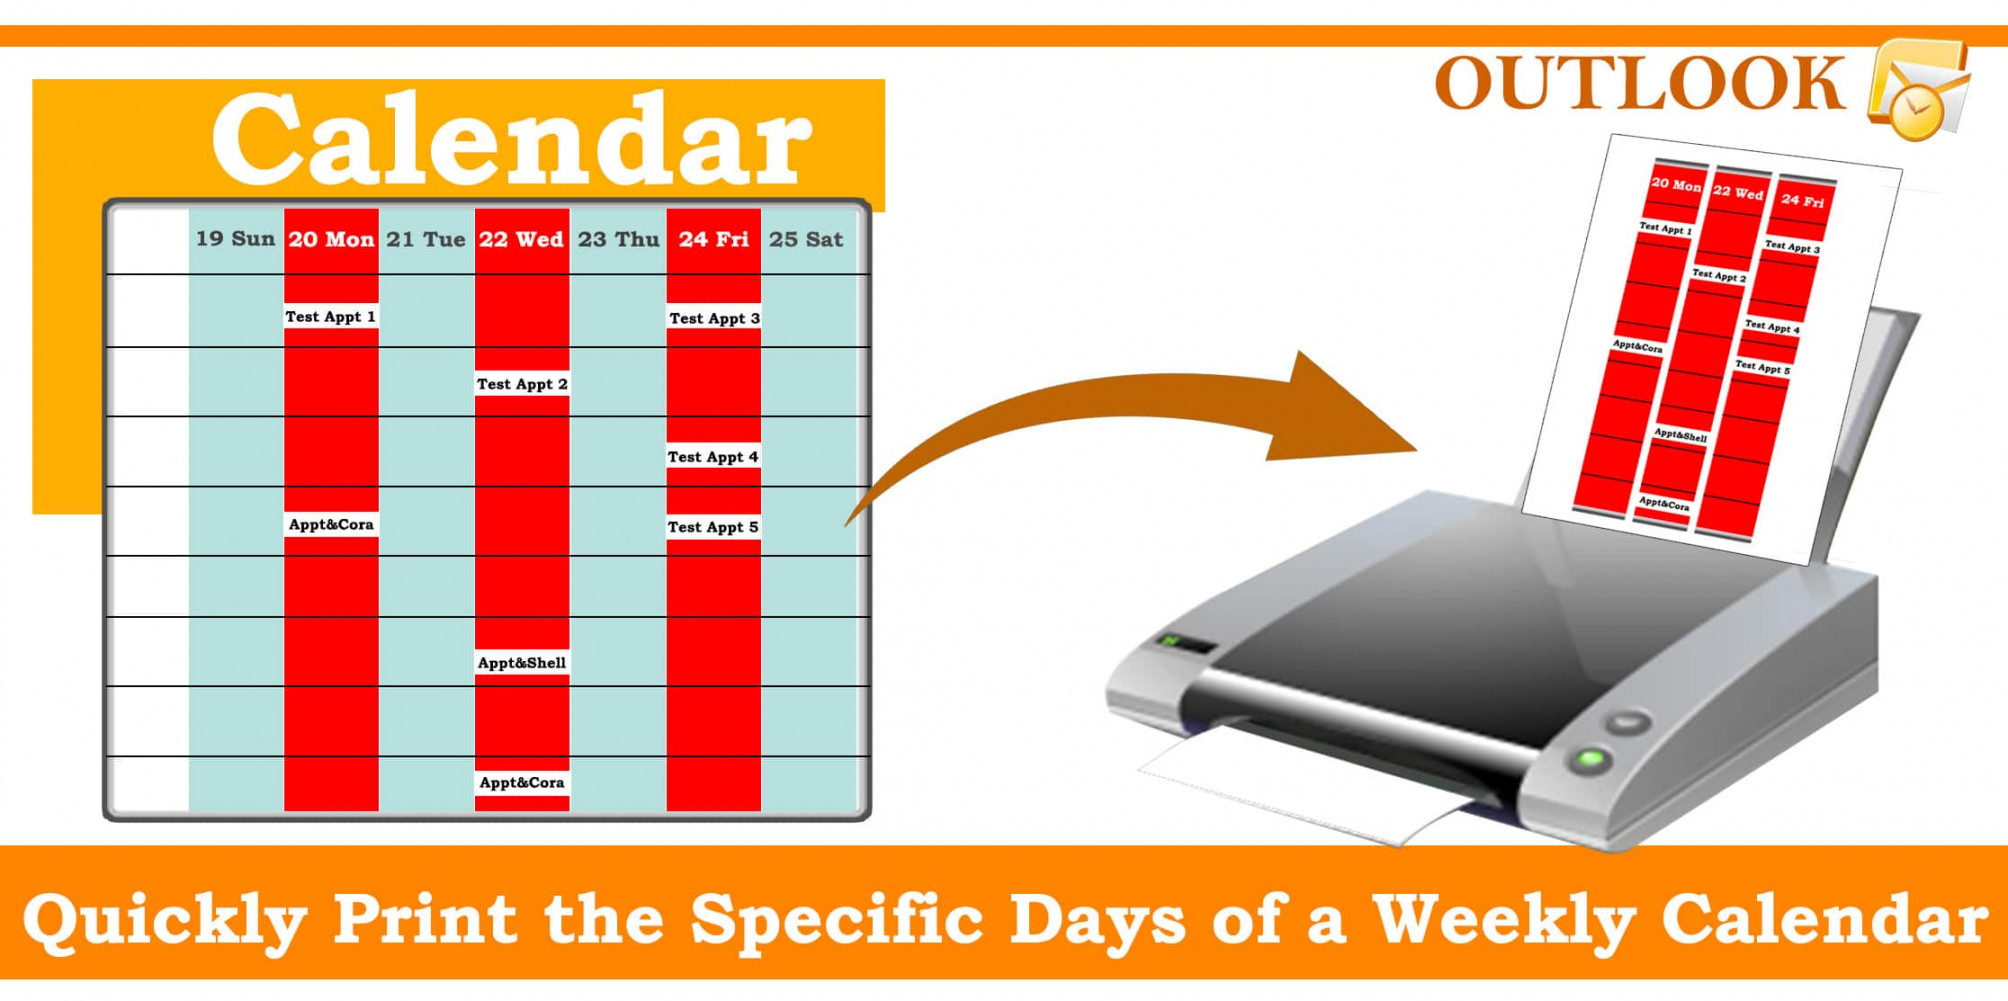 How to Quickly Print the Specific Days of a Weekly Calendar in